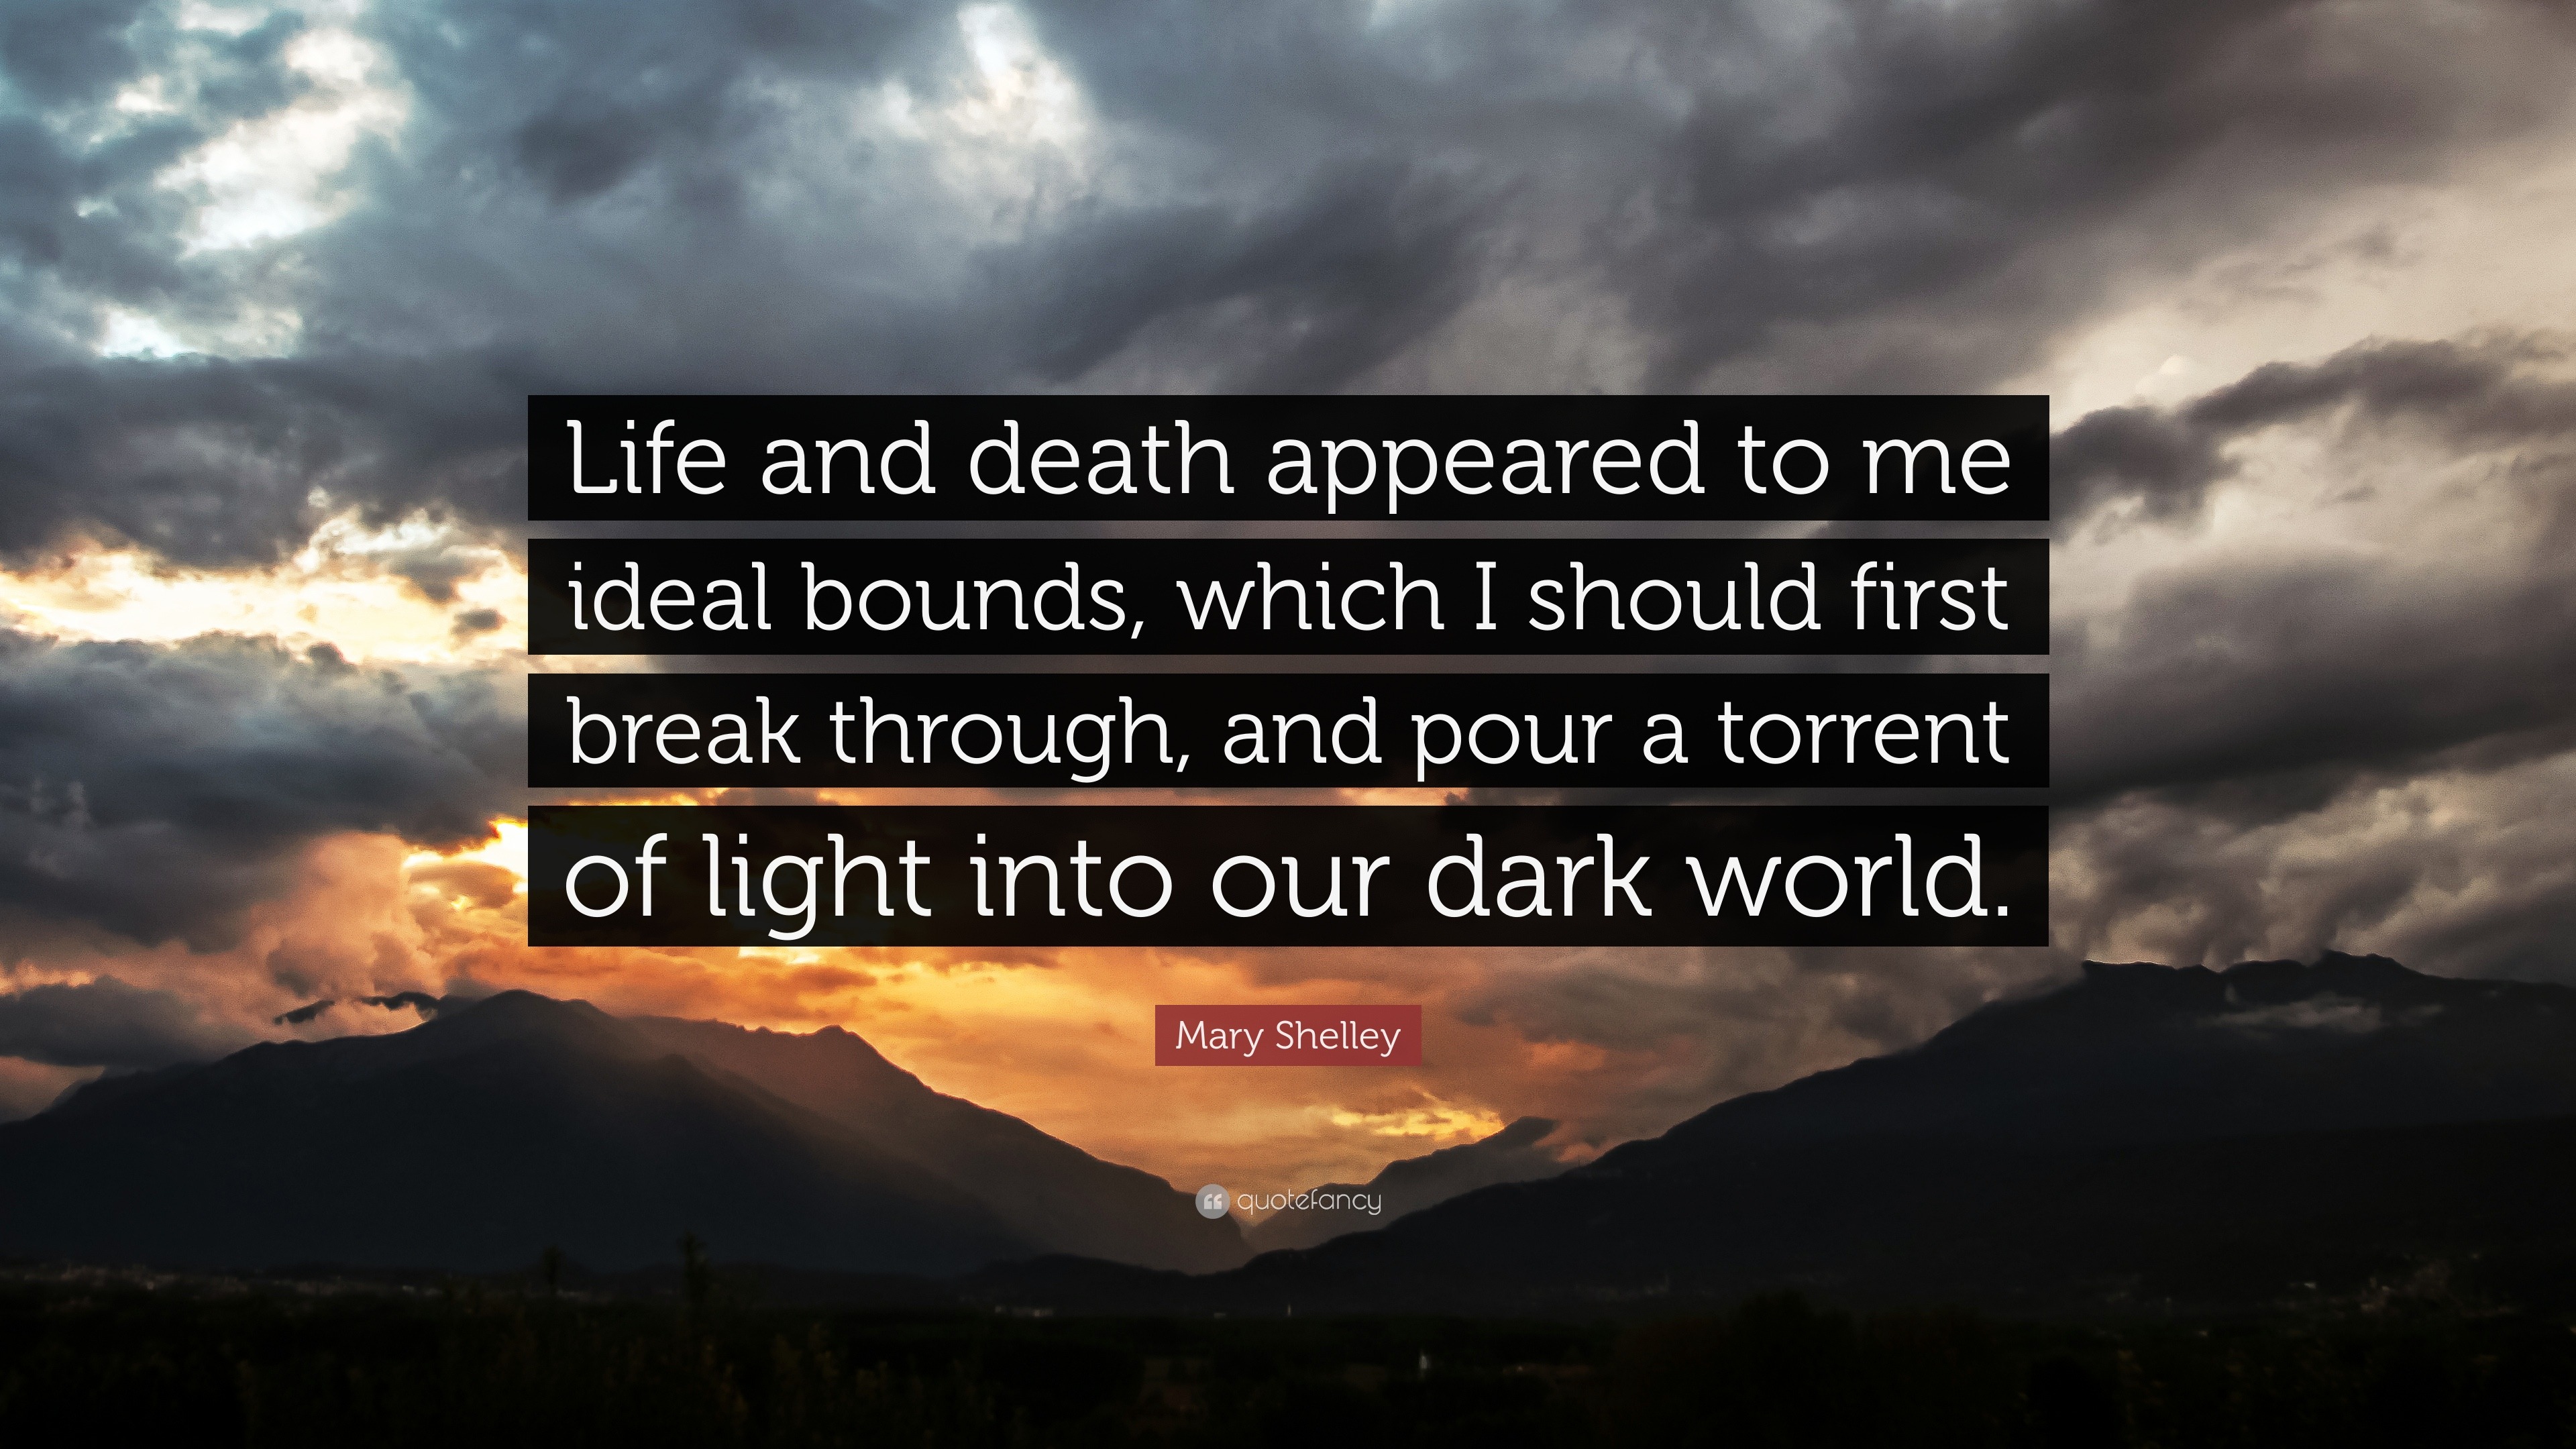 Mary Shelley Quote “Life and death appeared to me ideal